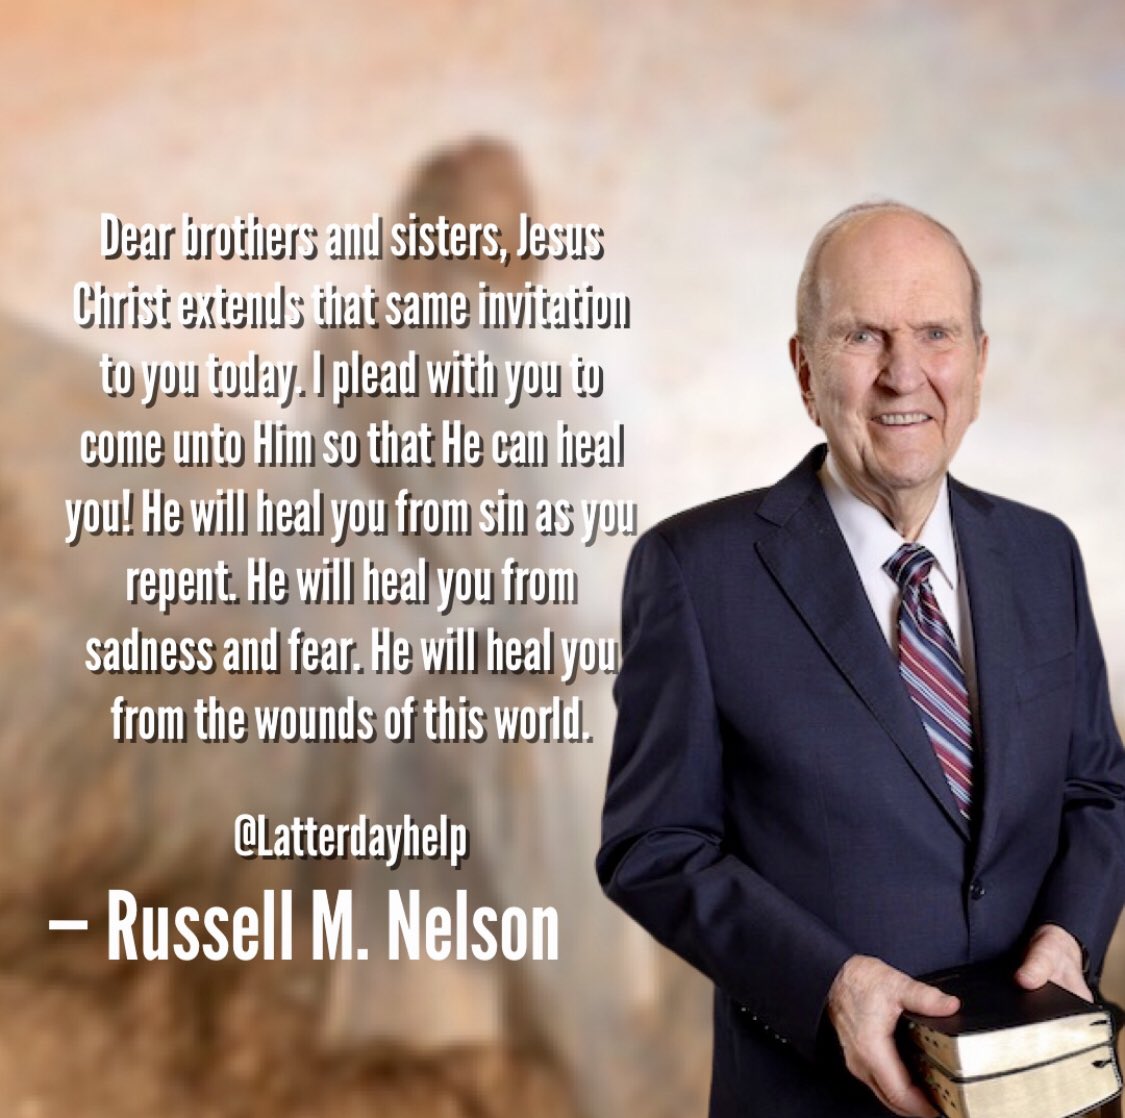 Come unto Jesus Christ so that He can heal you! He wants you to come unto Him. He will heal you of all things.
spiritualcrusade.com/2023/06/jesus-…

#jesuschrist #russellmnelson #christian #churchofjesuschrist #bookofmormon #bible #ldsconf #latterdaysaint #sin #heal